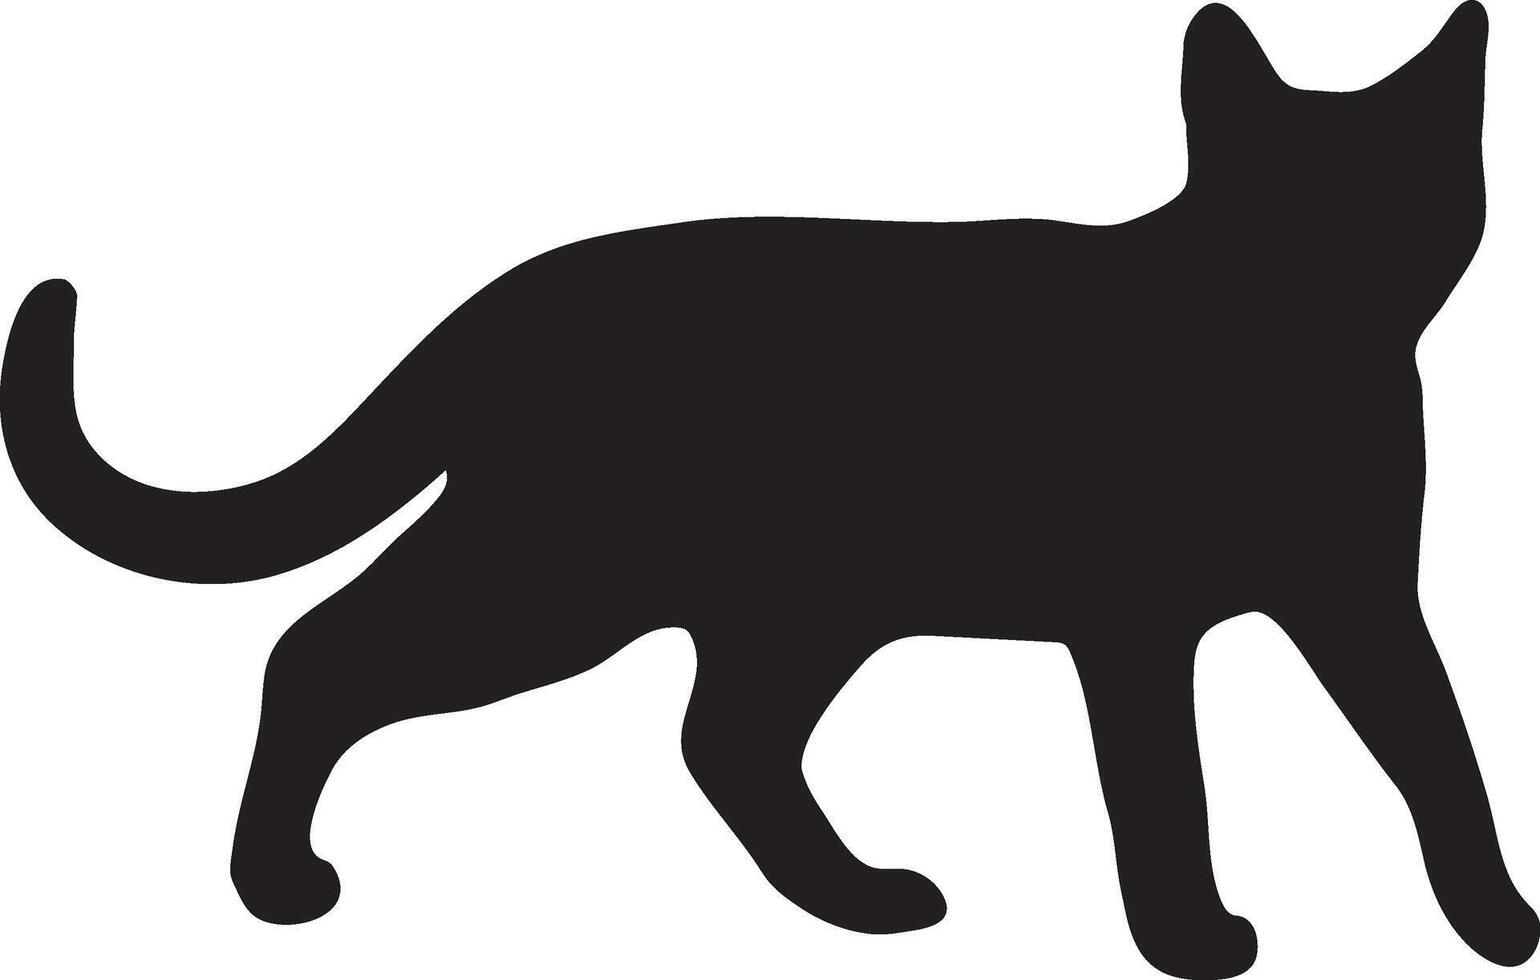 Cat vector logo design.Vector cat silhouette view side for retro logos, Isolated on white background